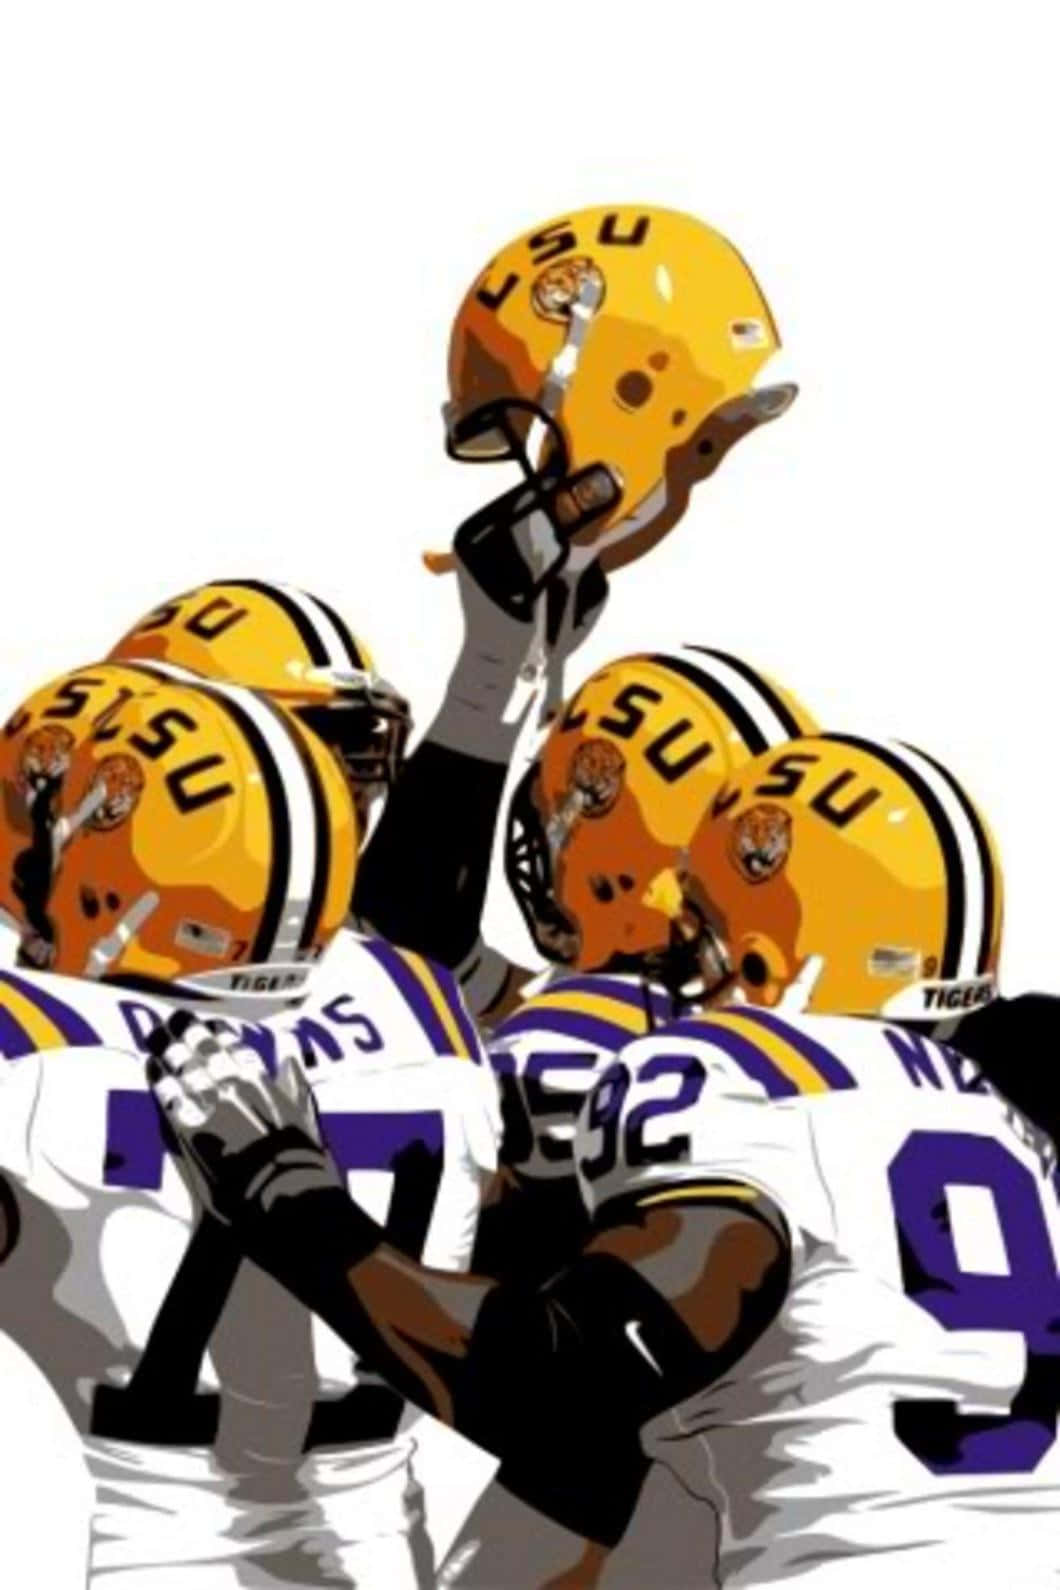 LSU fans unite with their iPhone Wallpaper